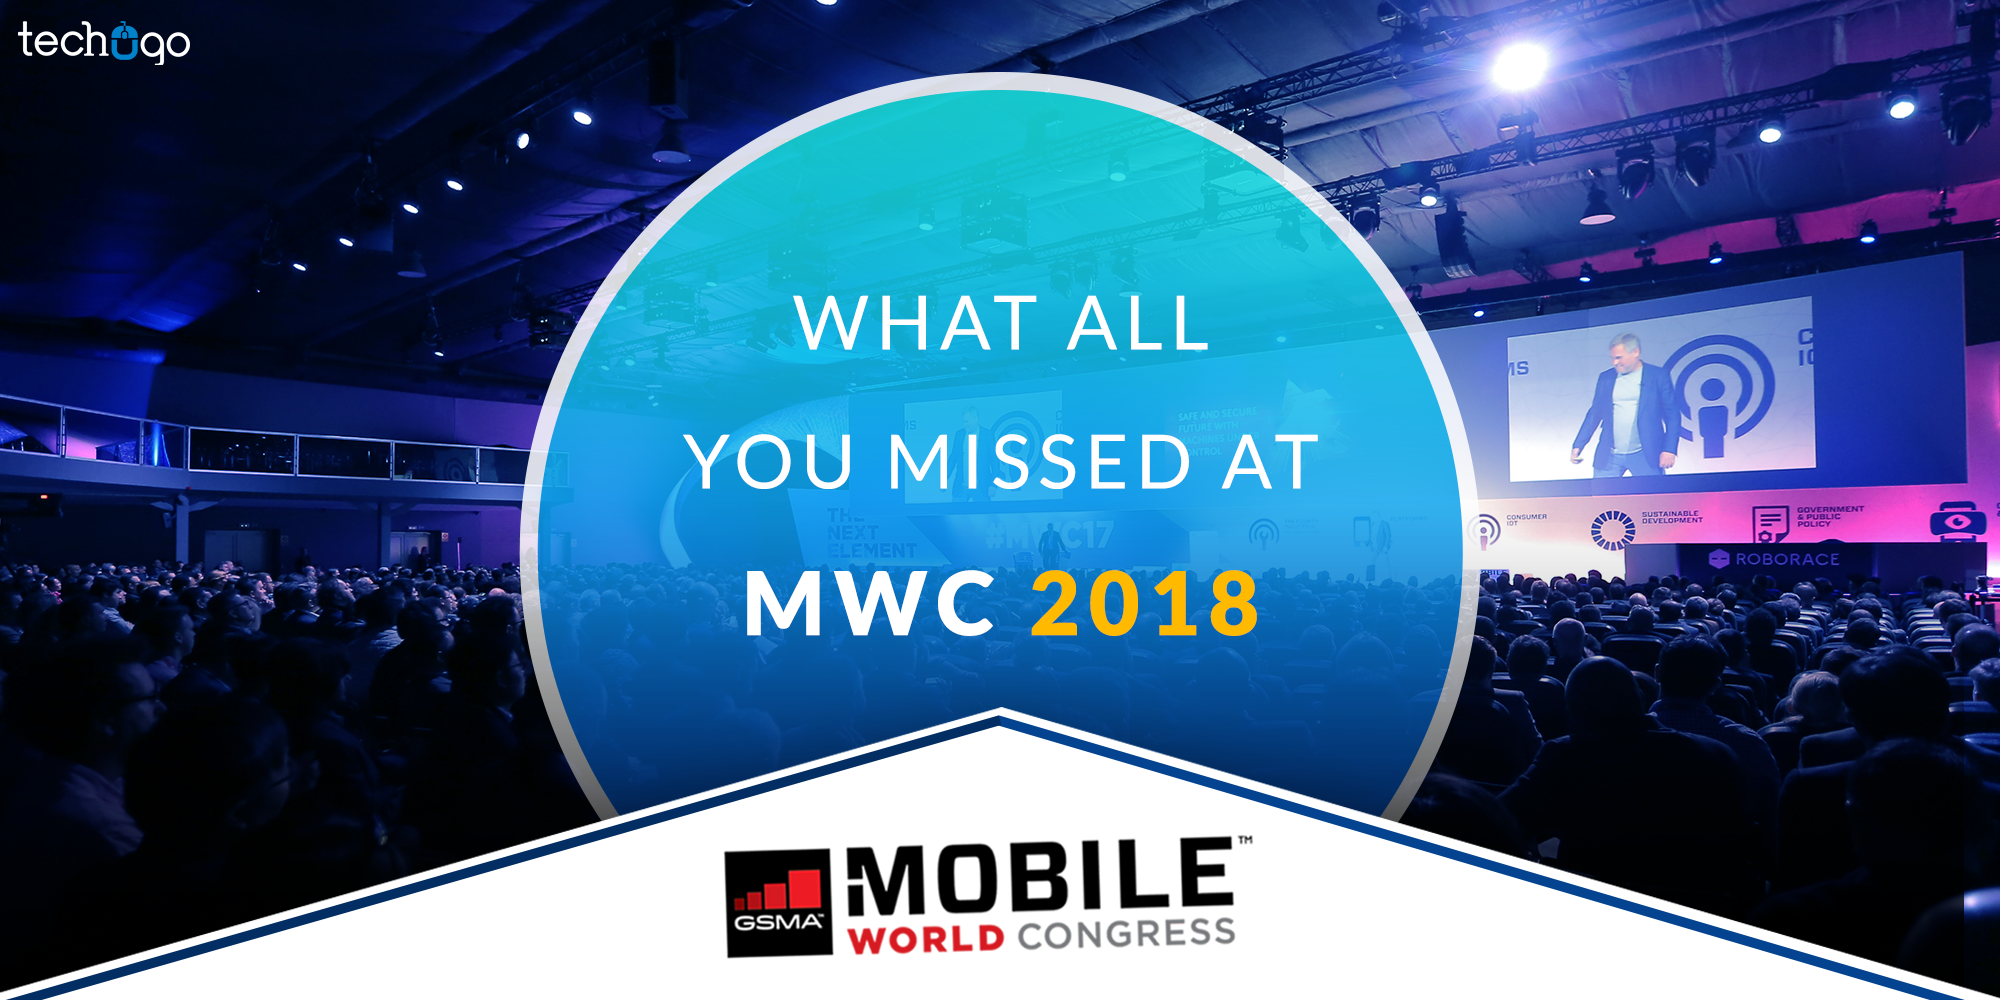 What All You Missed At MWC 2018